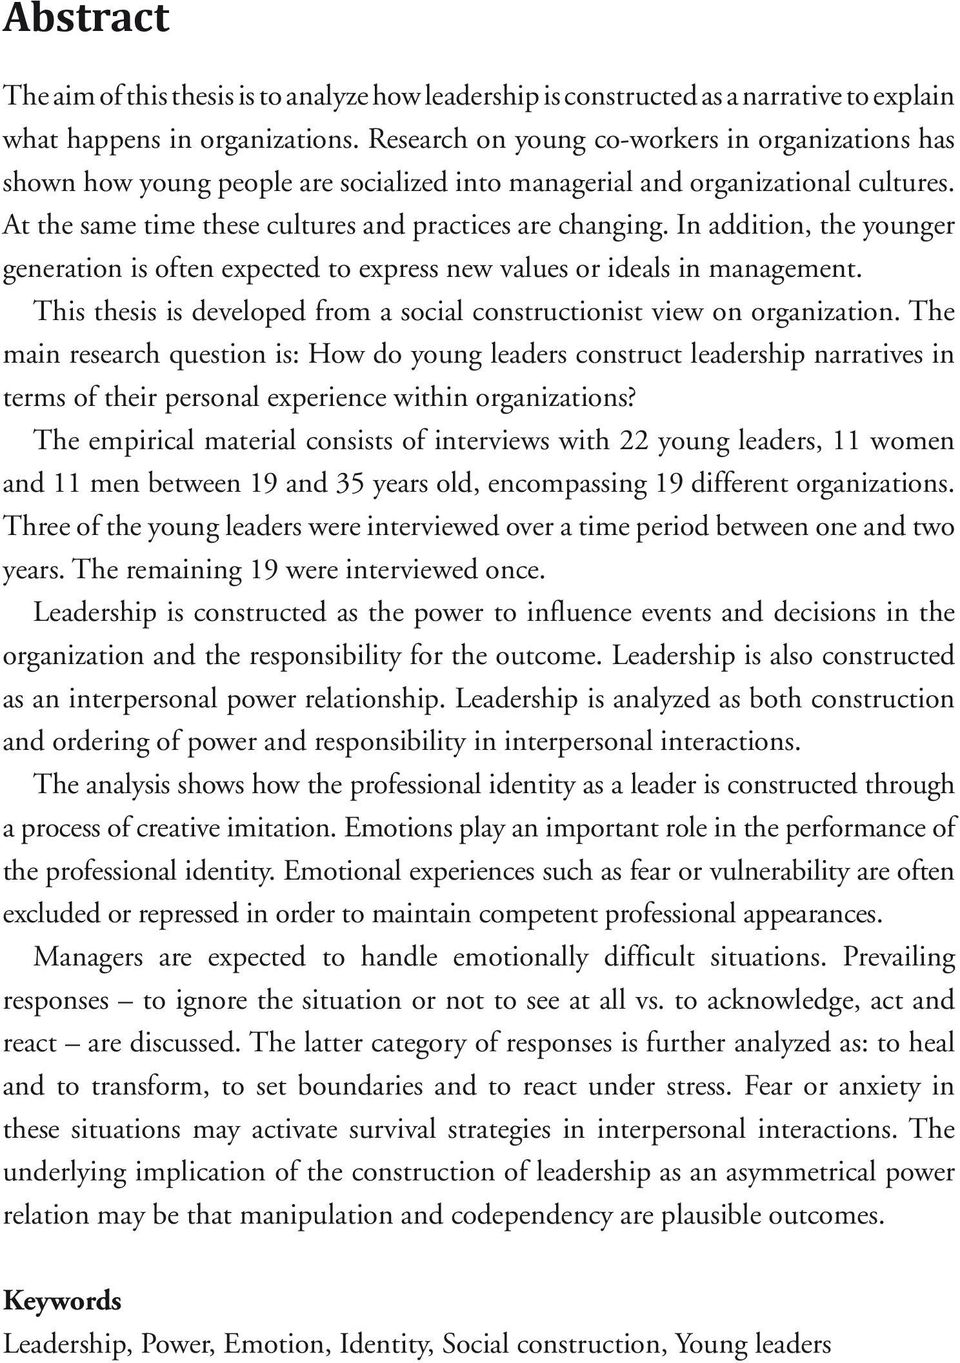 In addition, the younger generation is often expected to express new values or ideals in management. This thesis is developed from a social constructionist view on organization.